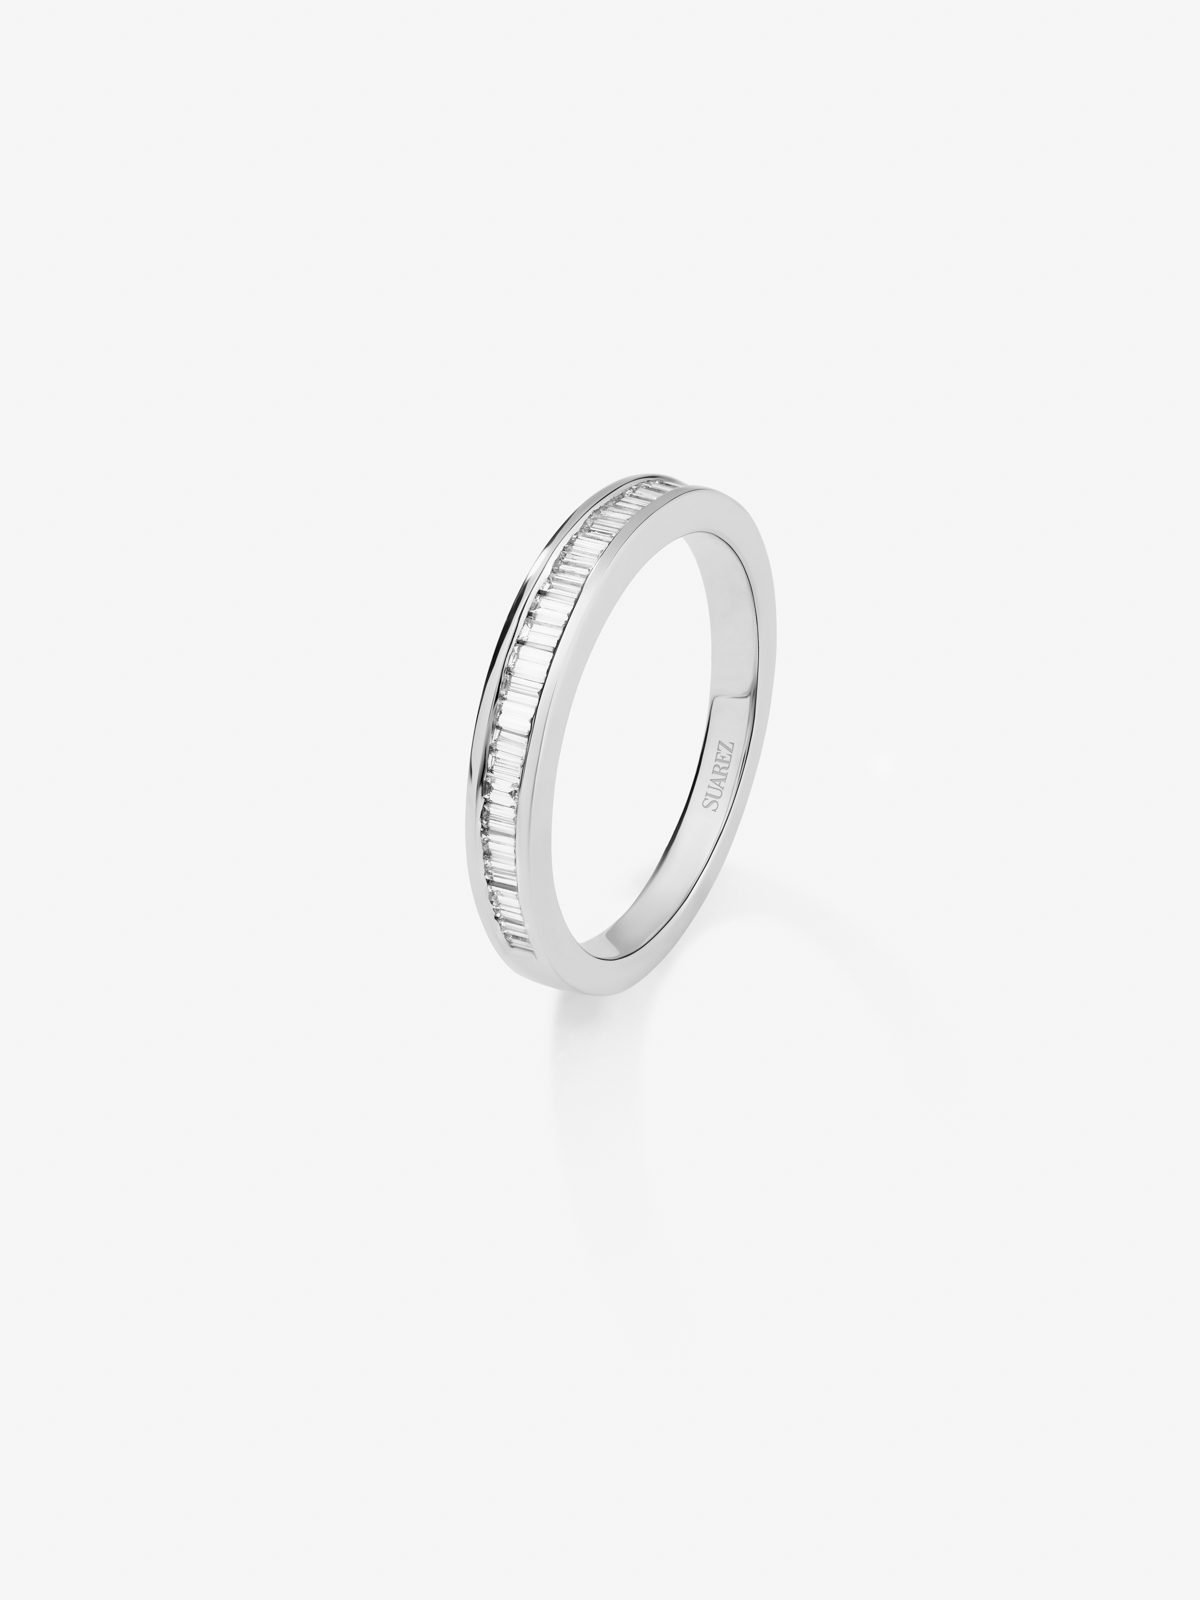 Half engagement ring band made from 18K white gold with baguette cut diamonds set in band.